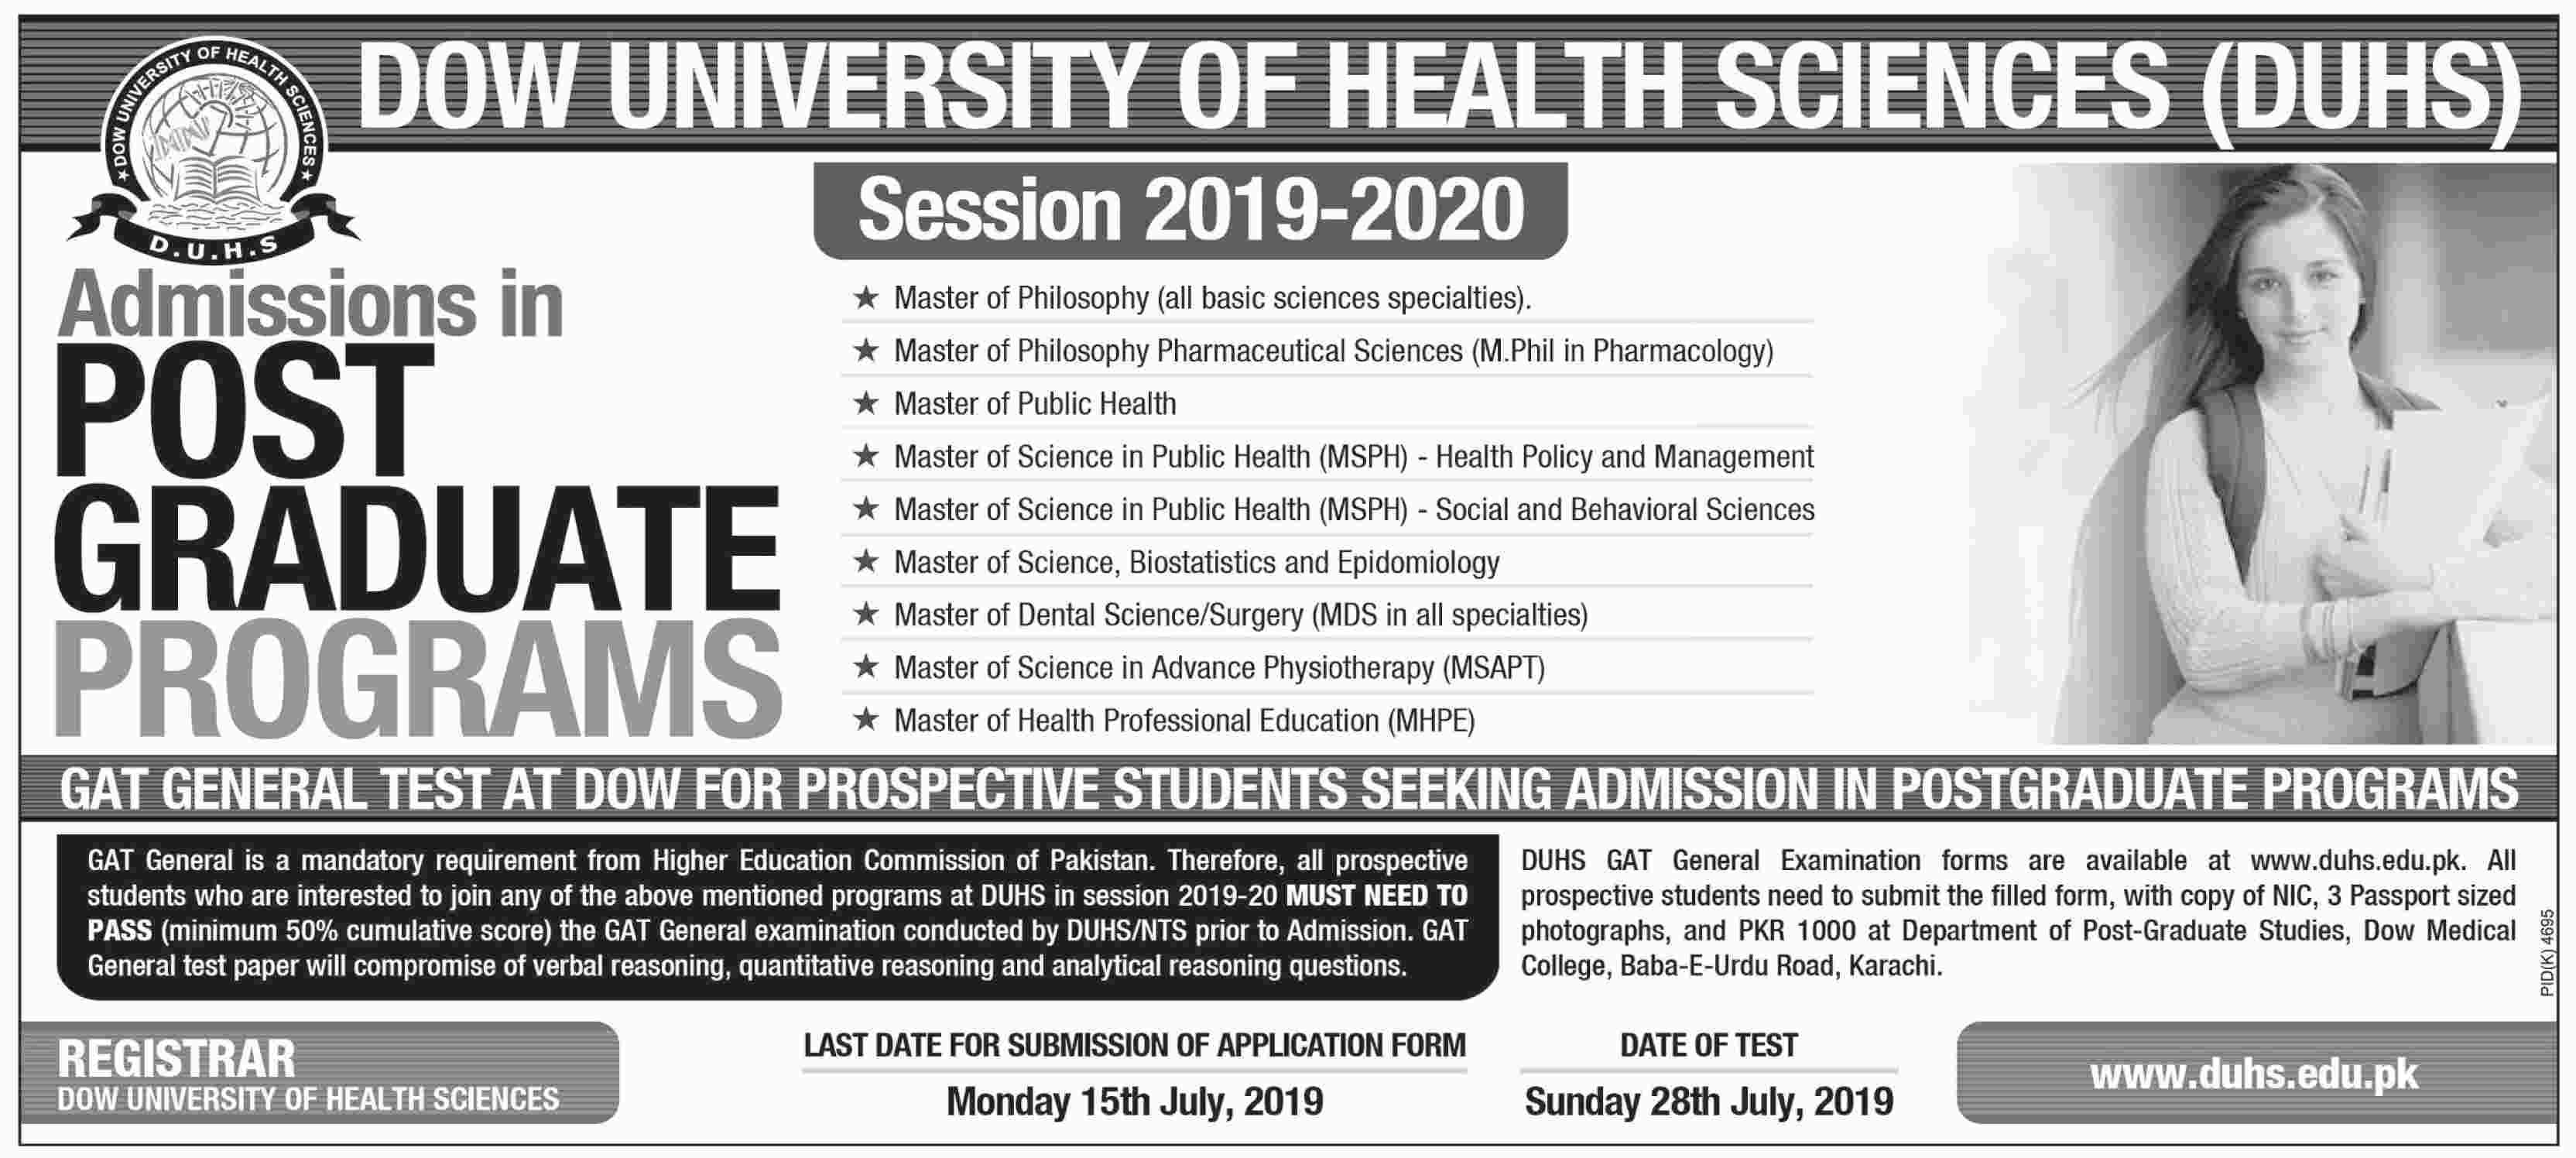 Dow University of Health Sciences Admission in Post Graduate Programs 2019